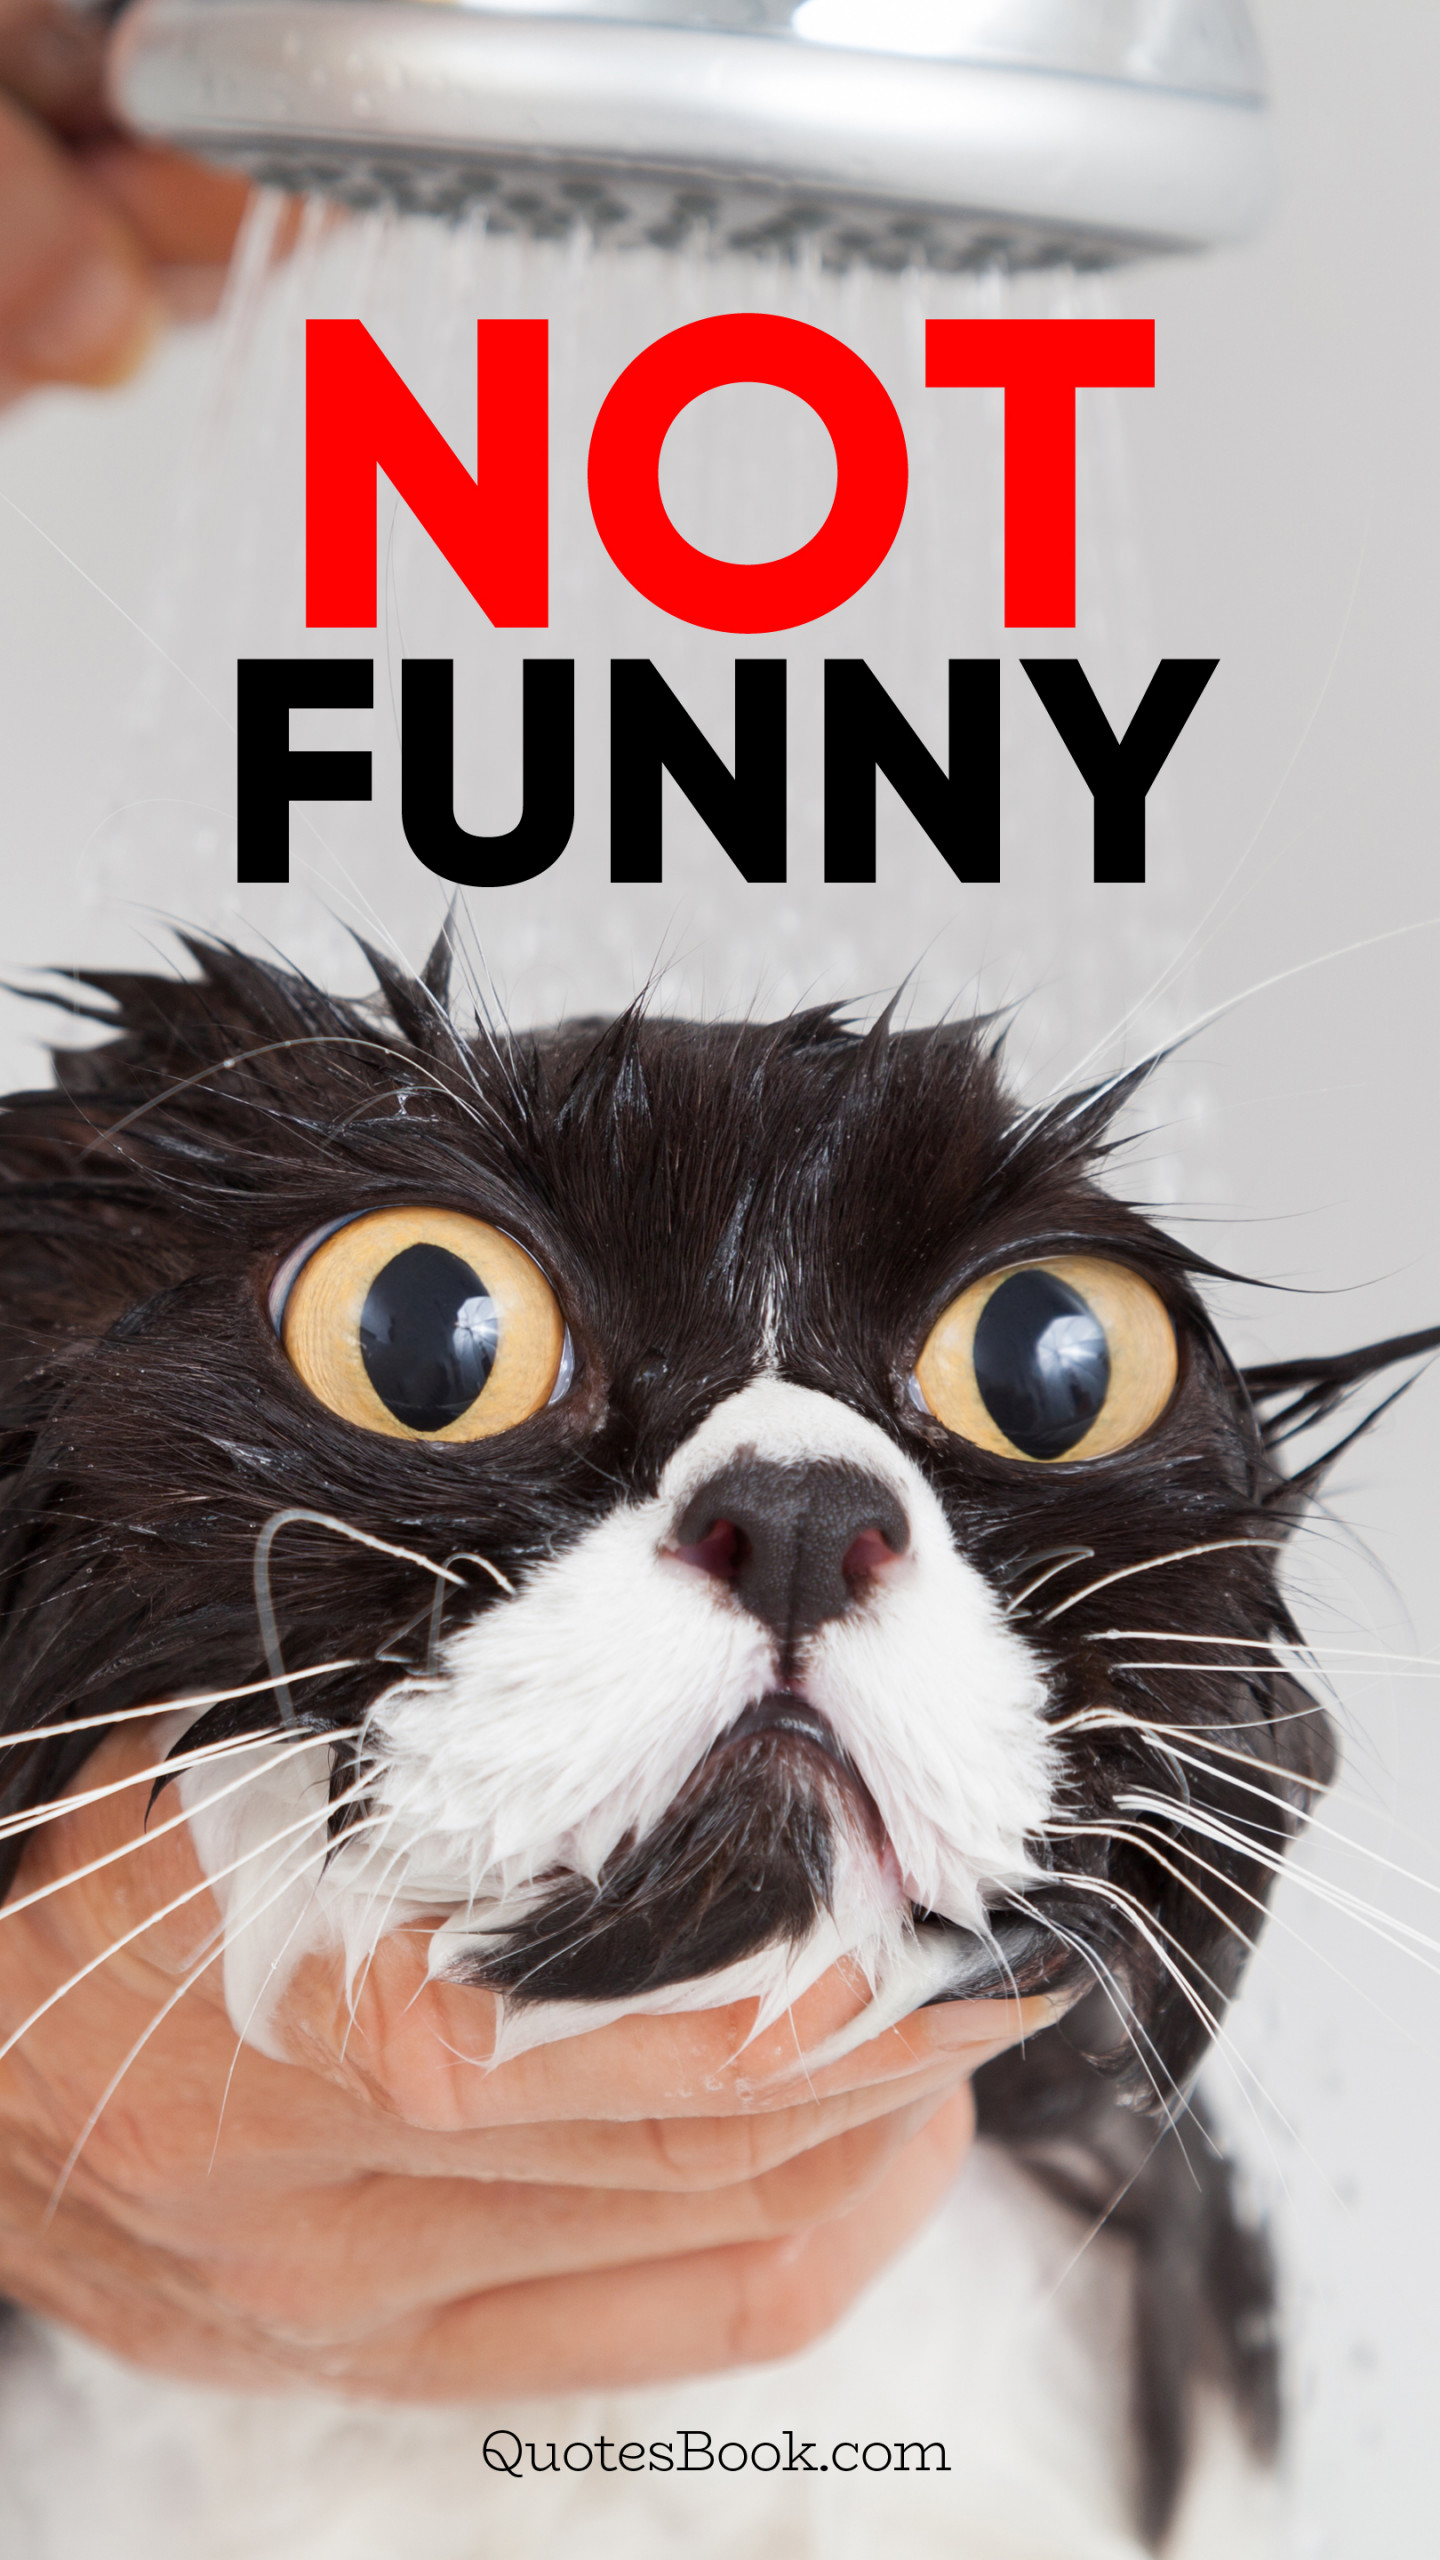 not funny 1440x2560 4398